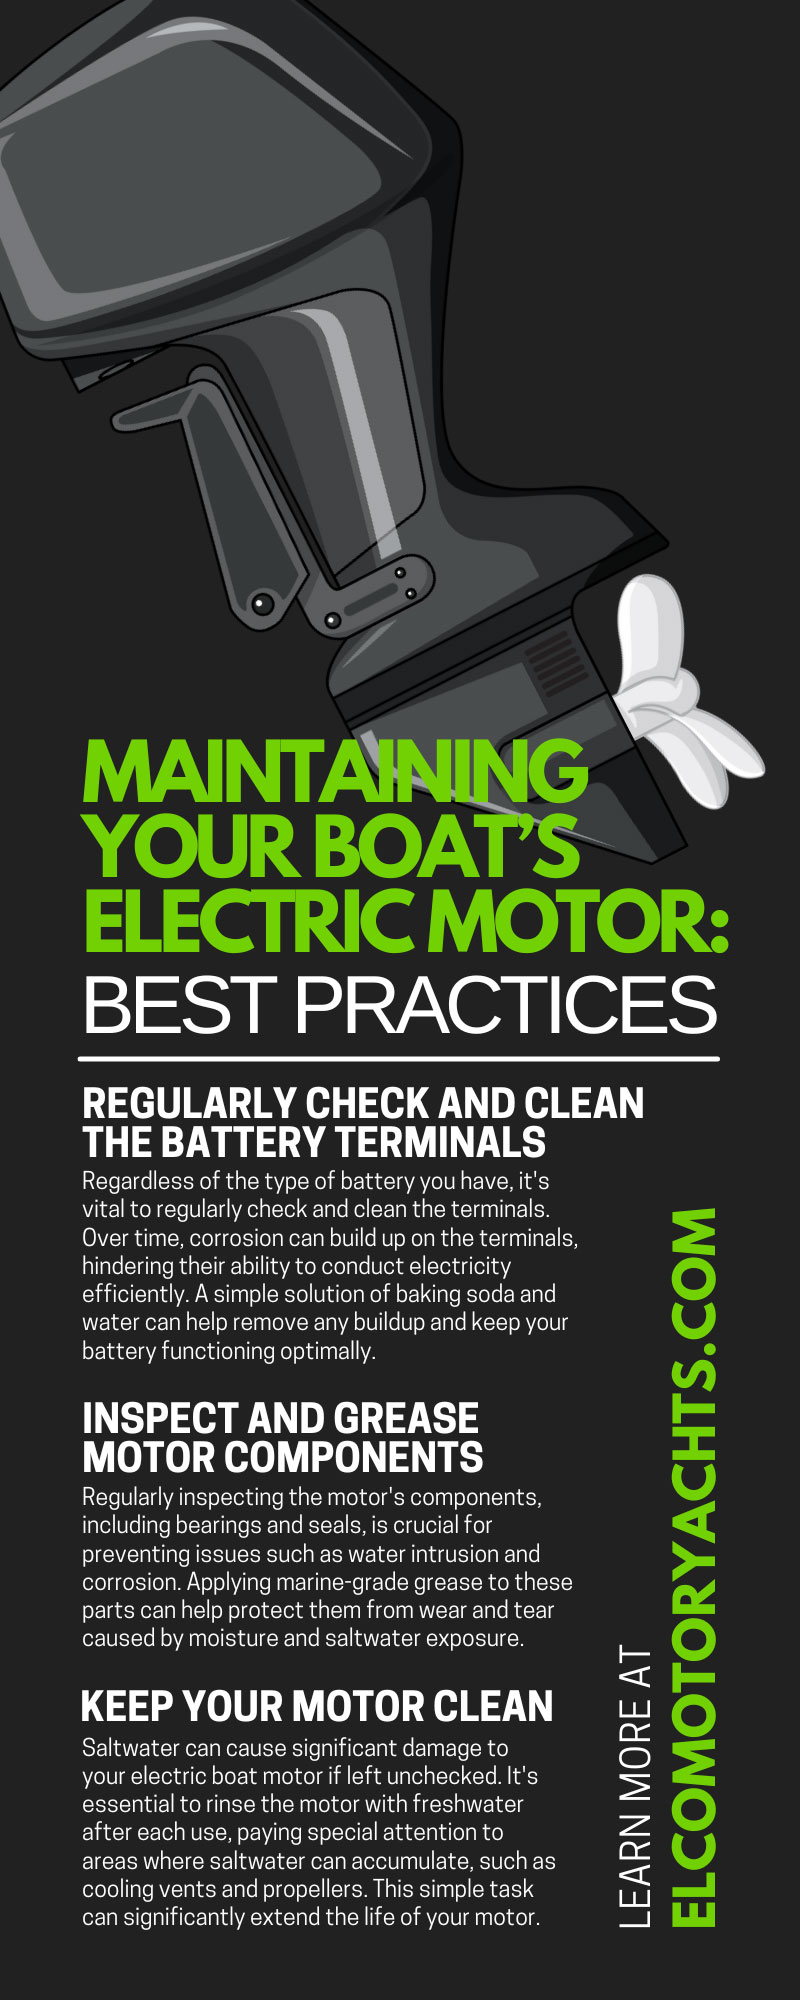 Maintaining Your Boat’s Electric Motor: 7 Best Practices
